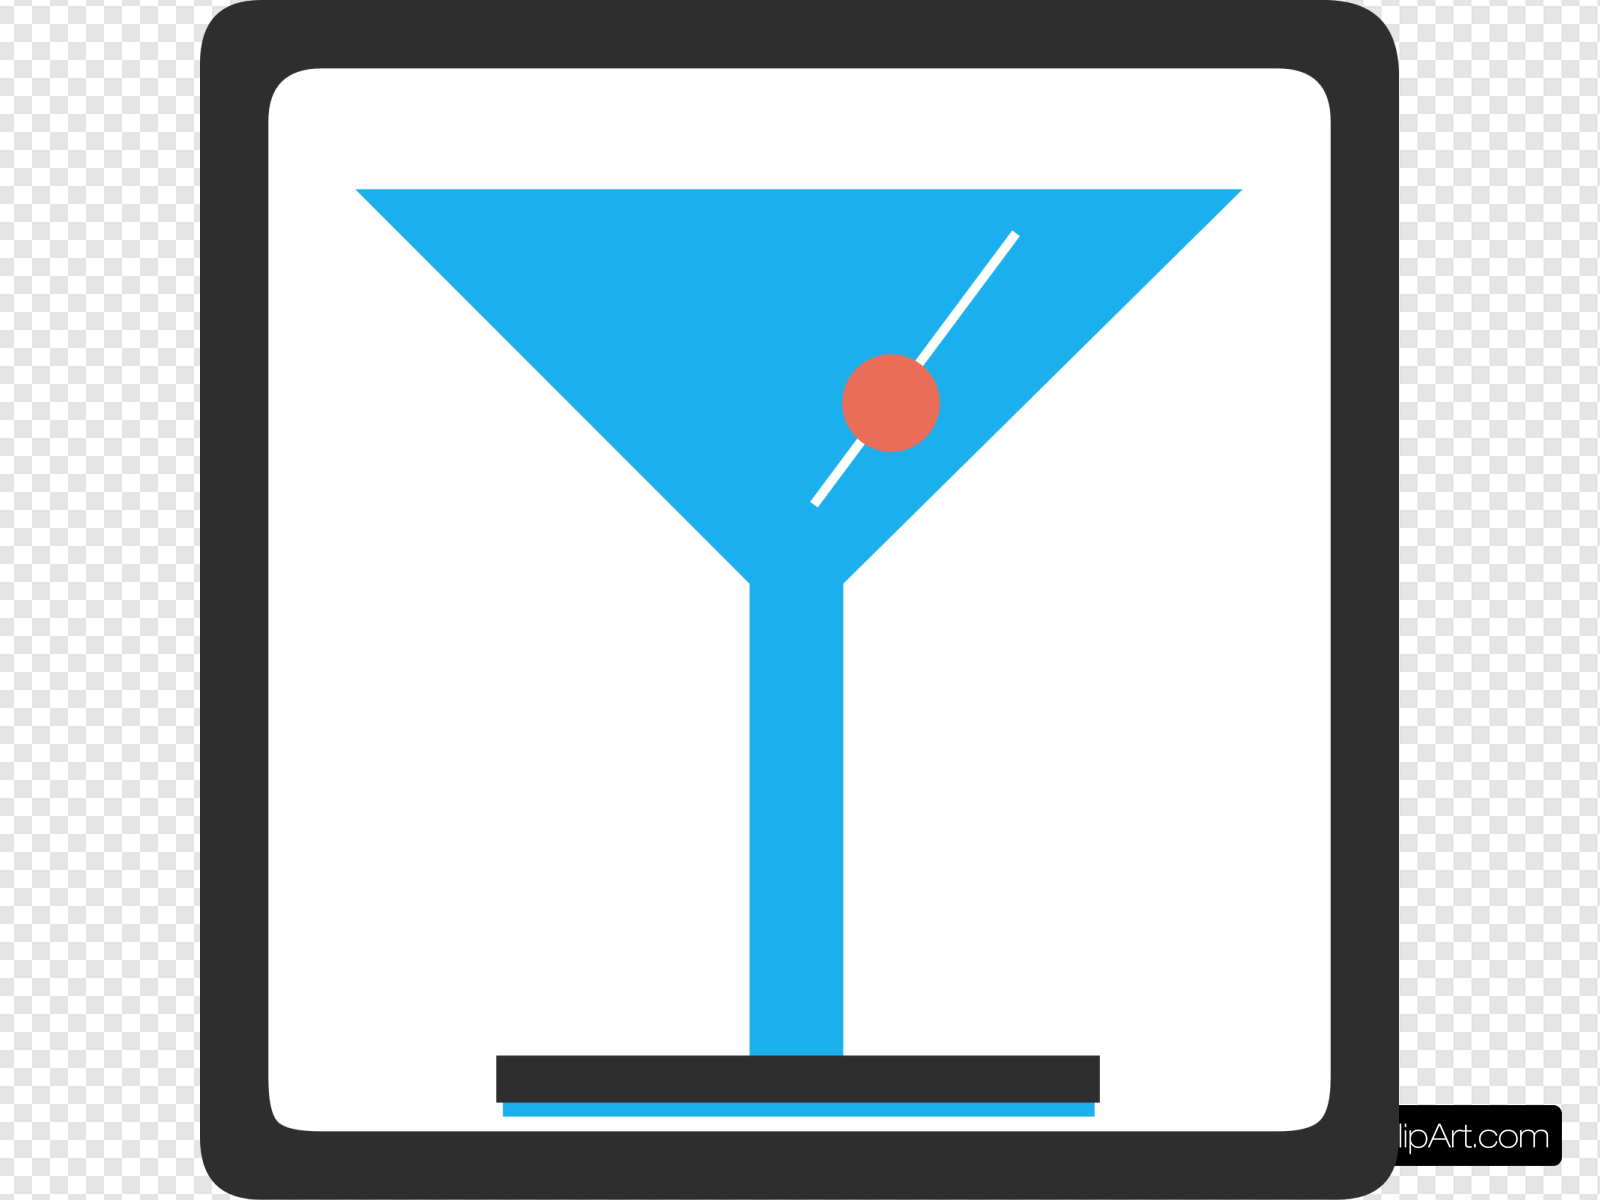 Bar Sign Clip art, Icon and SVG.